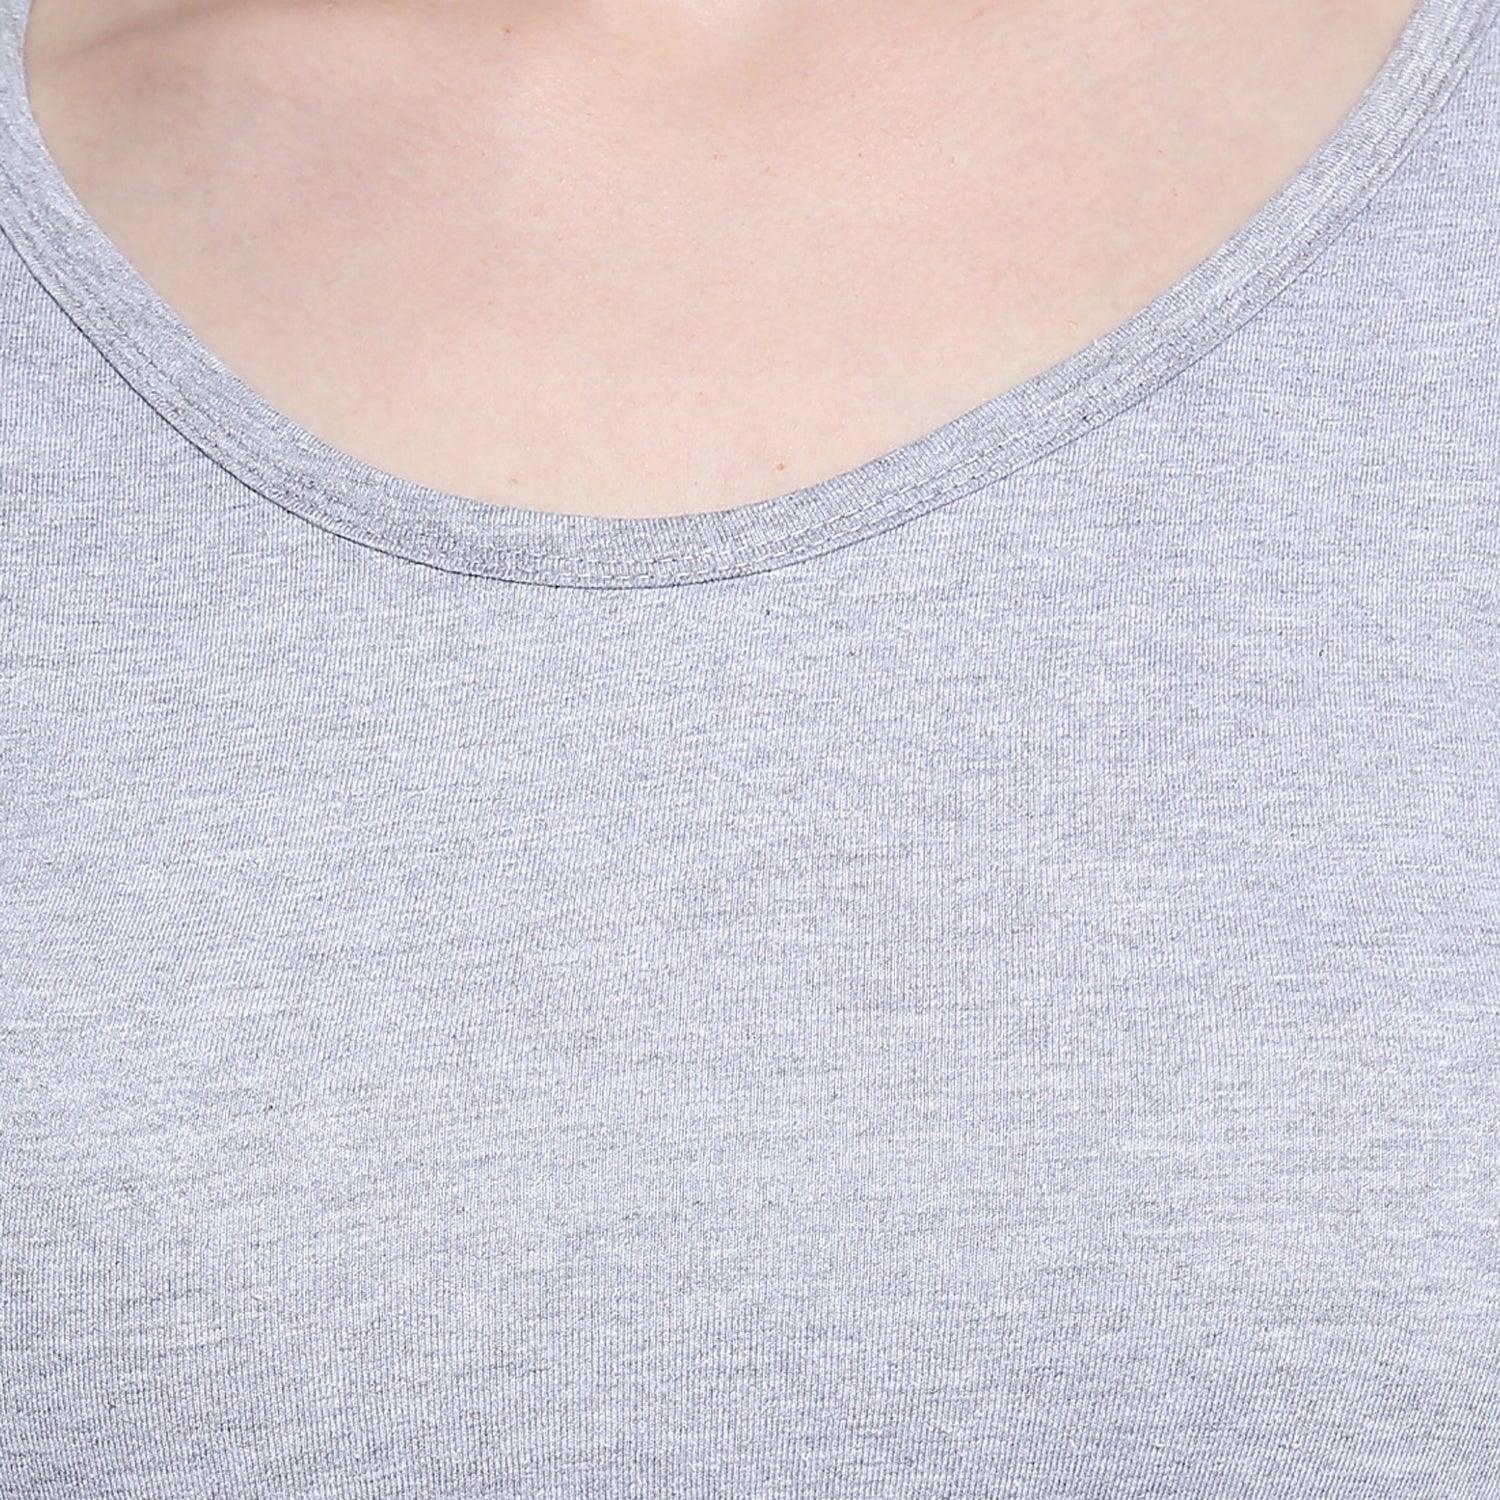 Solid Light grey Round neck T-shirt - Znxclothing